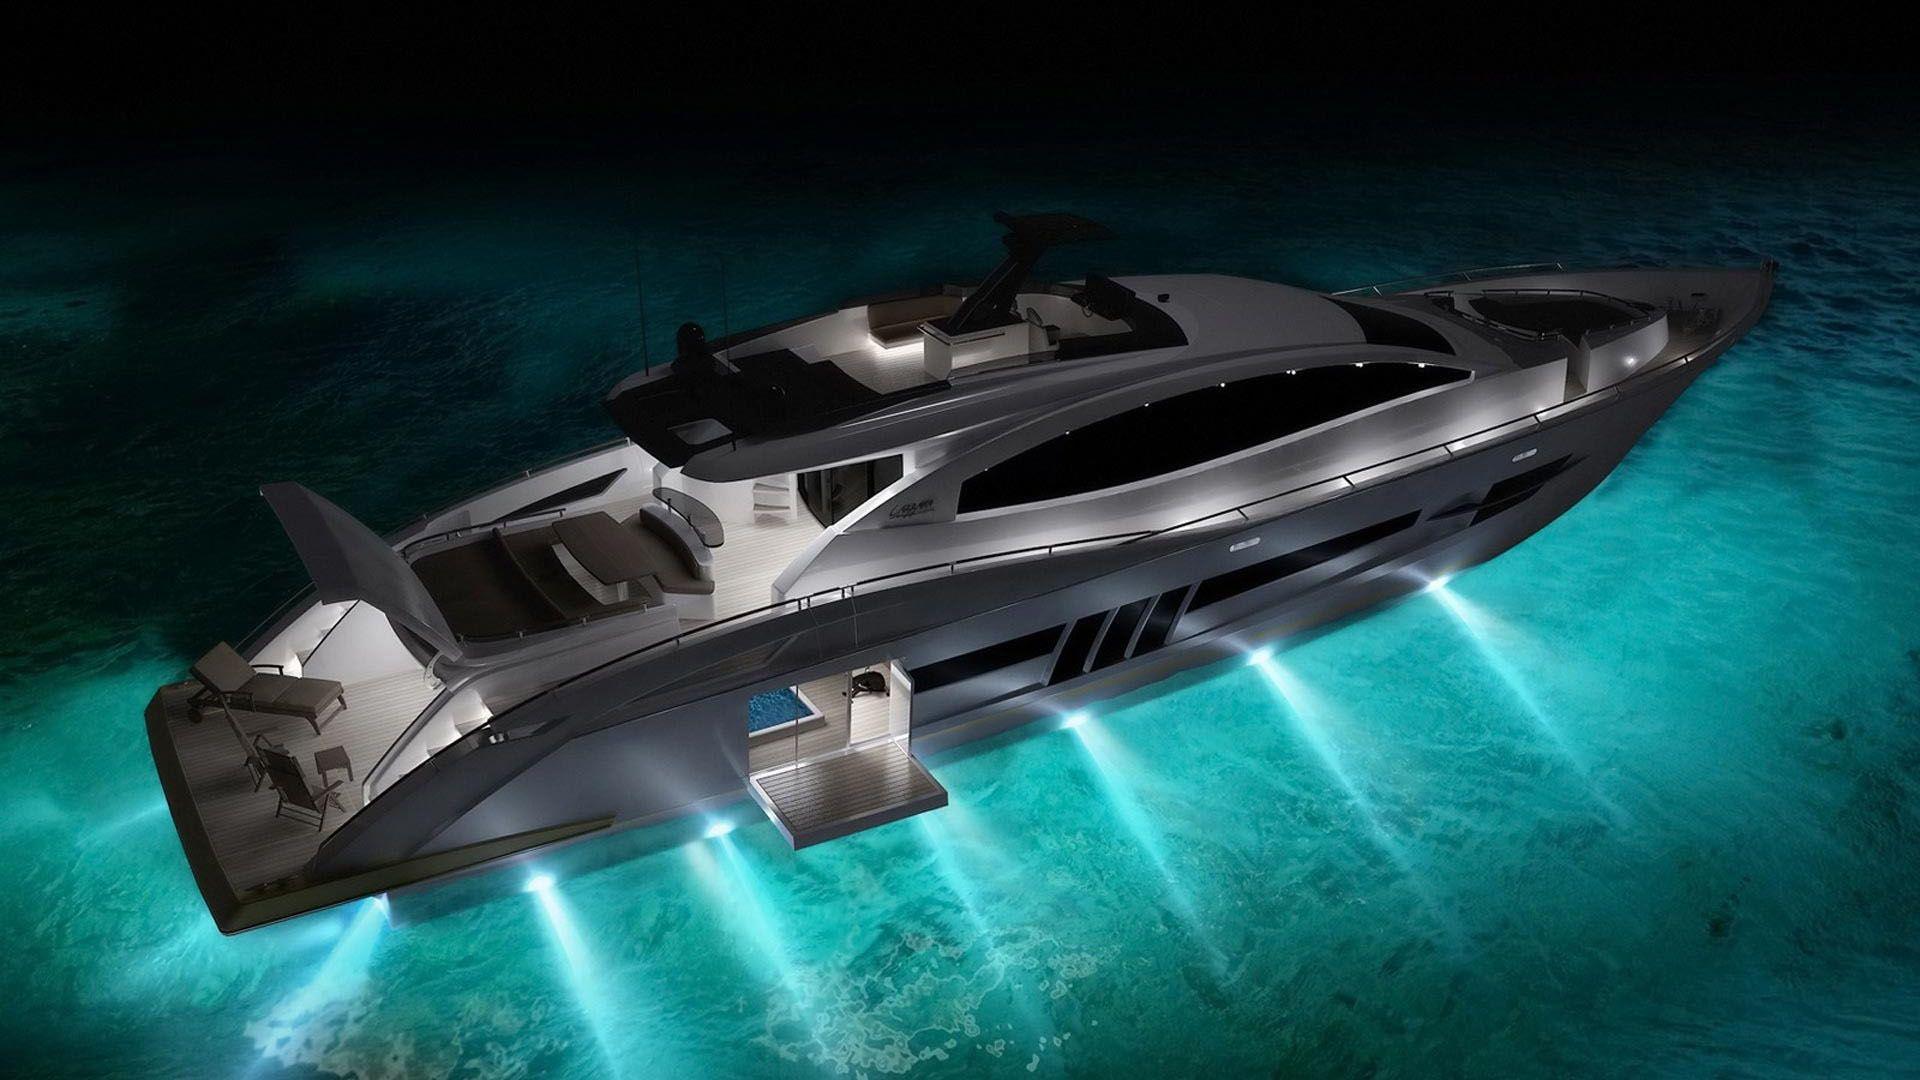 Cool Boat Wallpapers